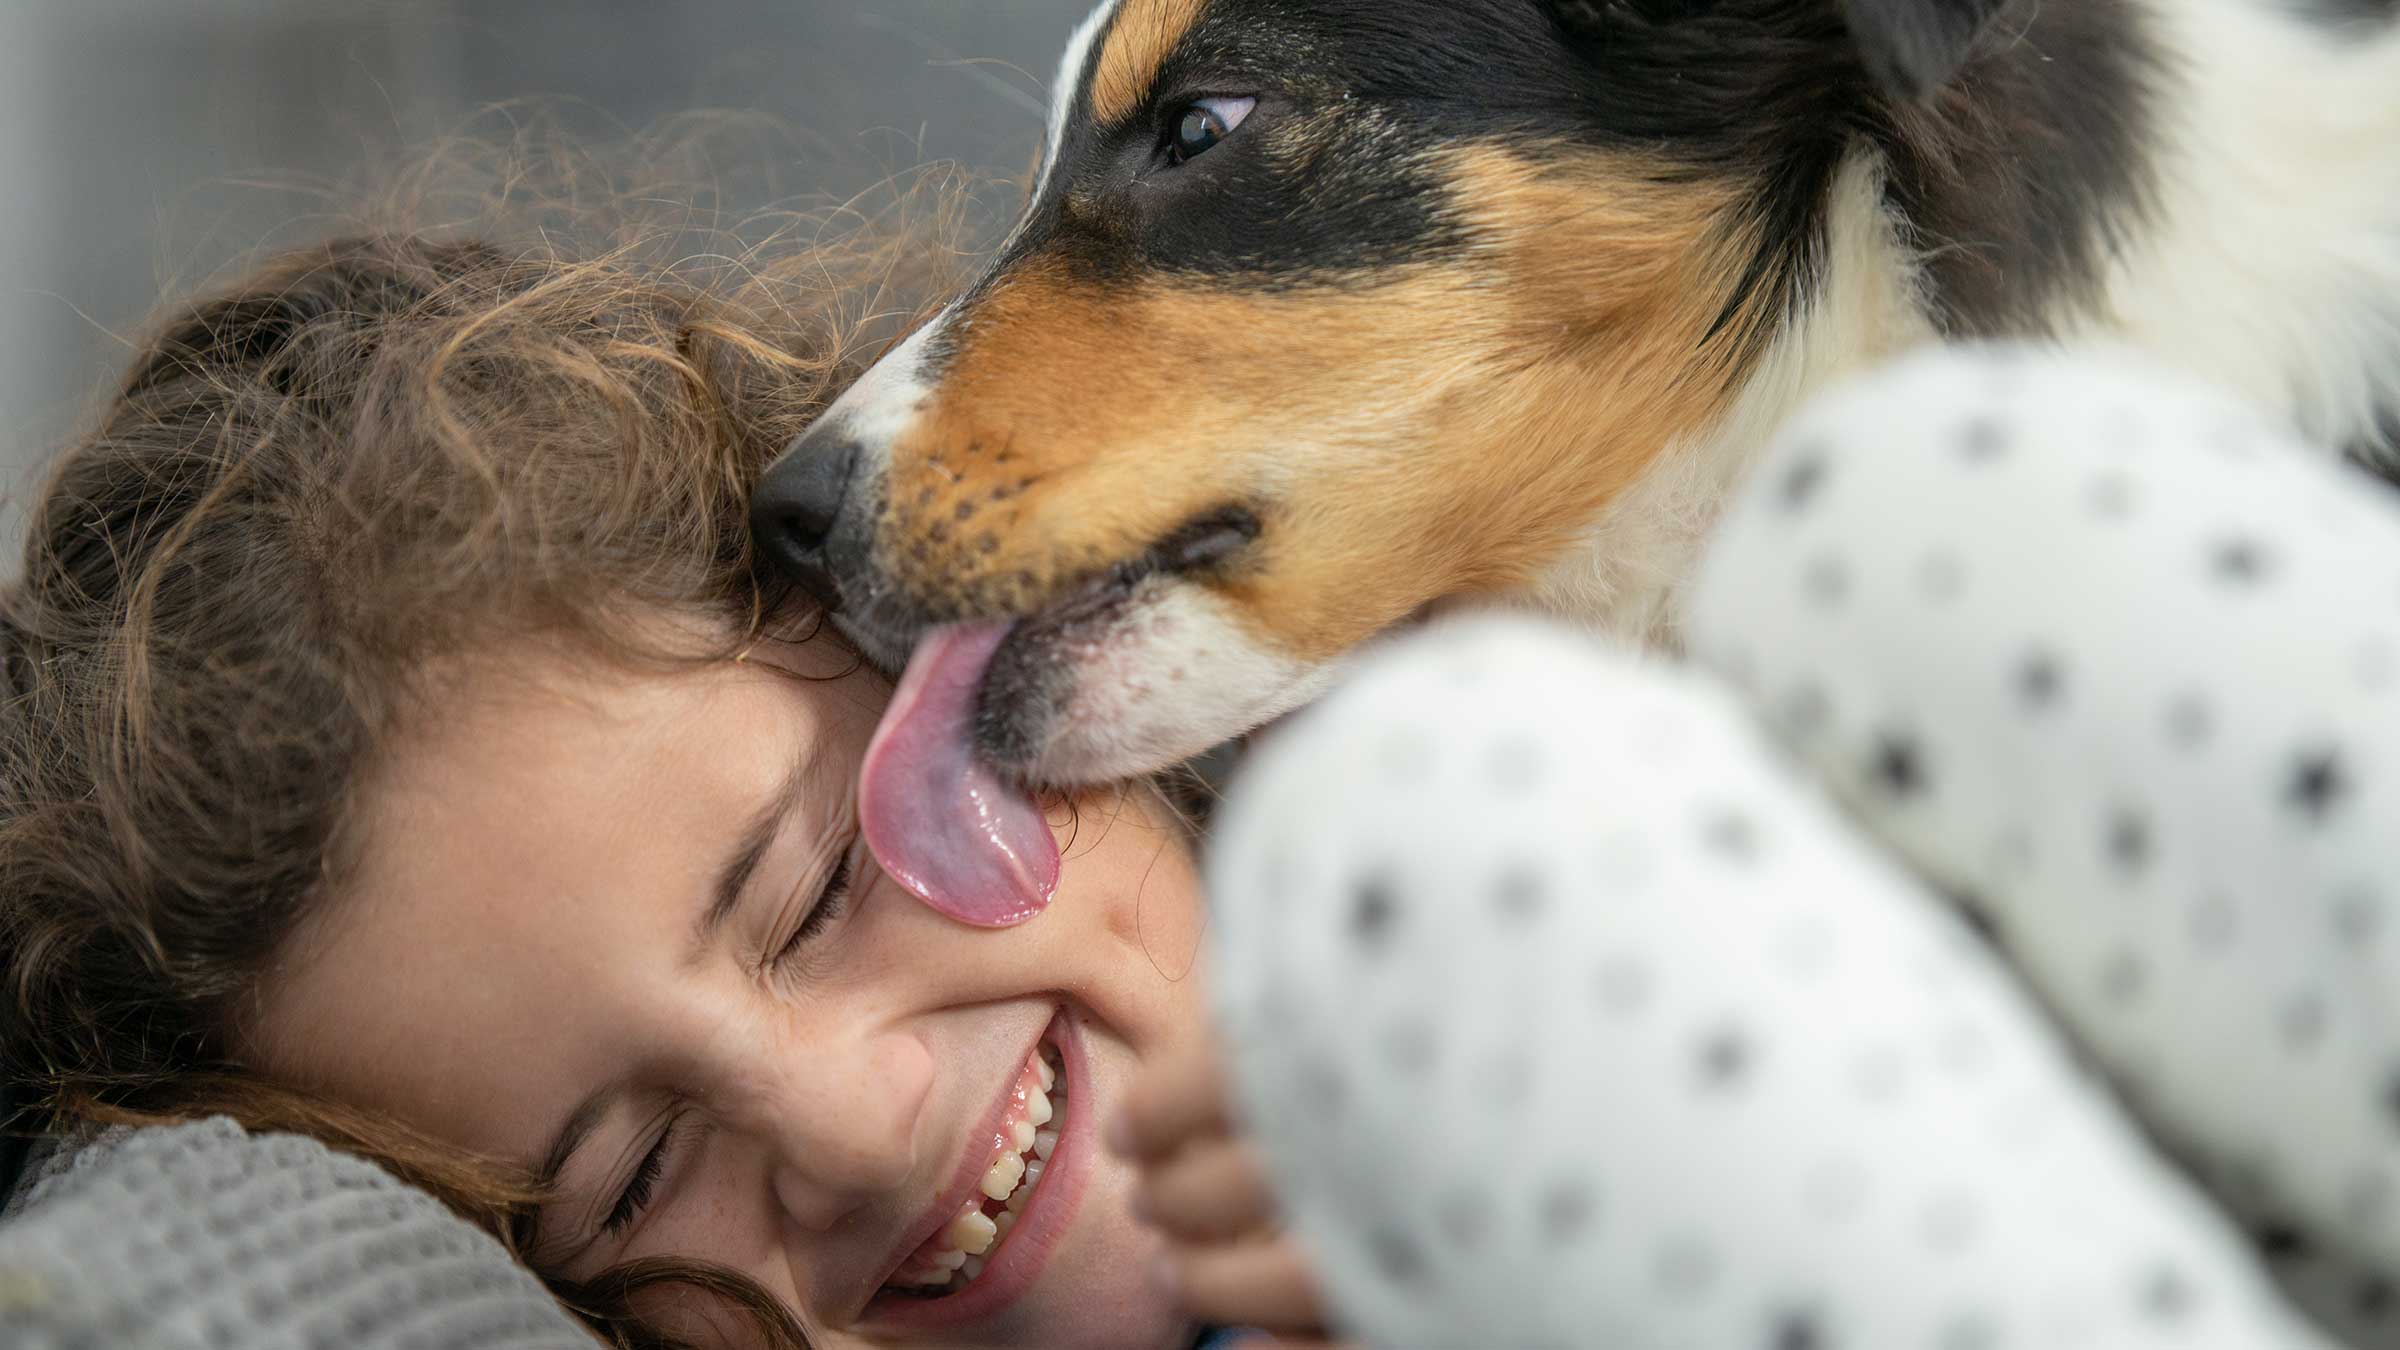 A girl getting her face licked by her dog